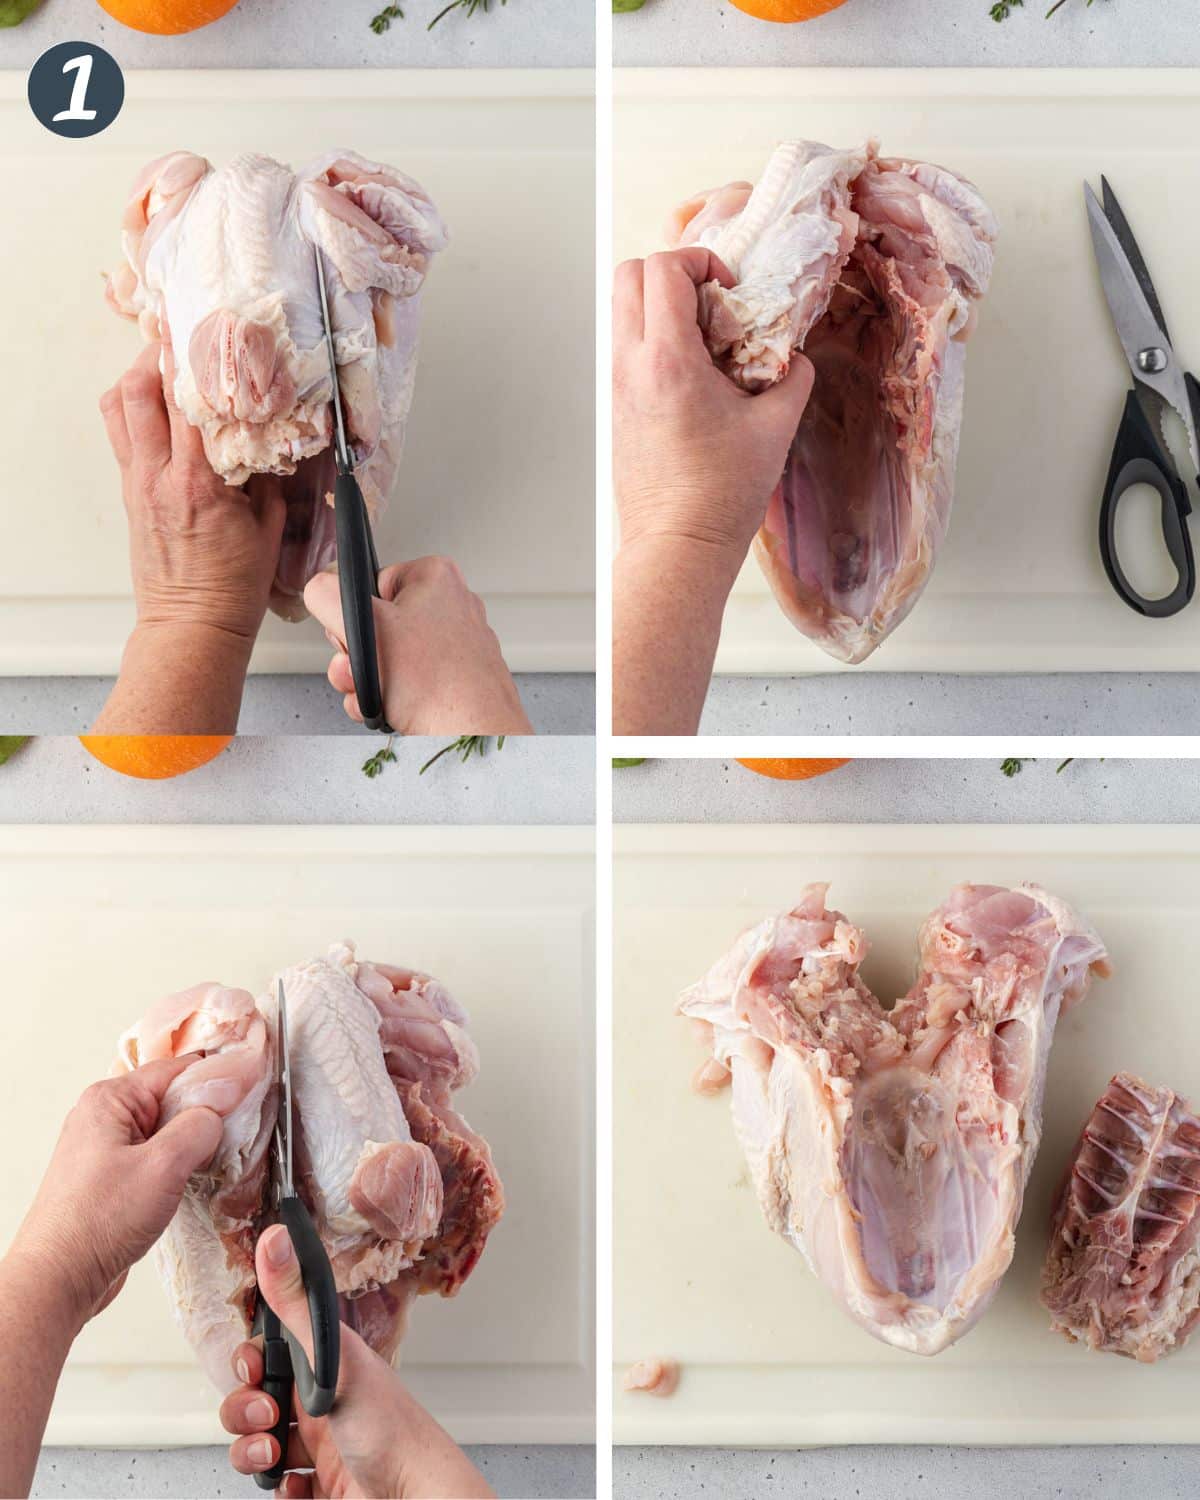 4 images showing how to cut the backbone out of the turkey.